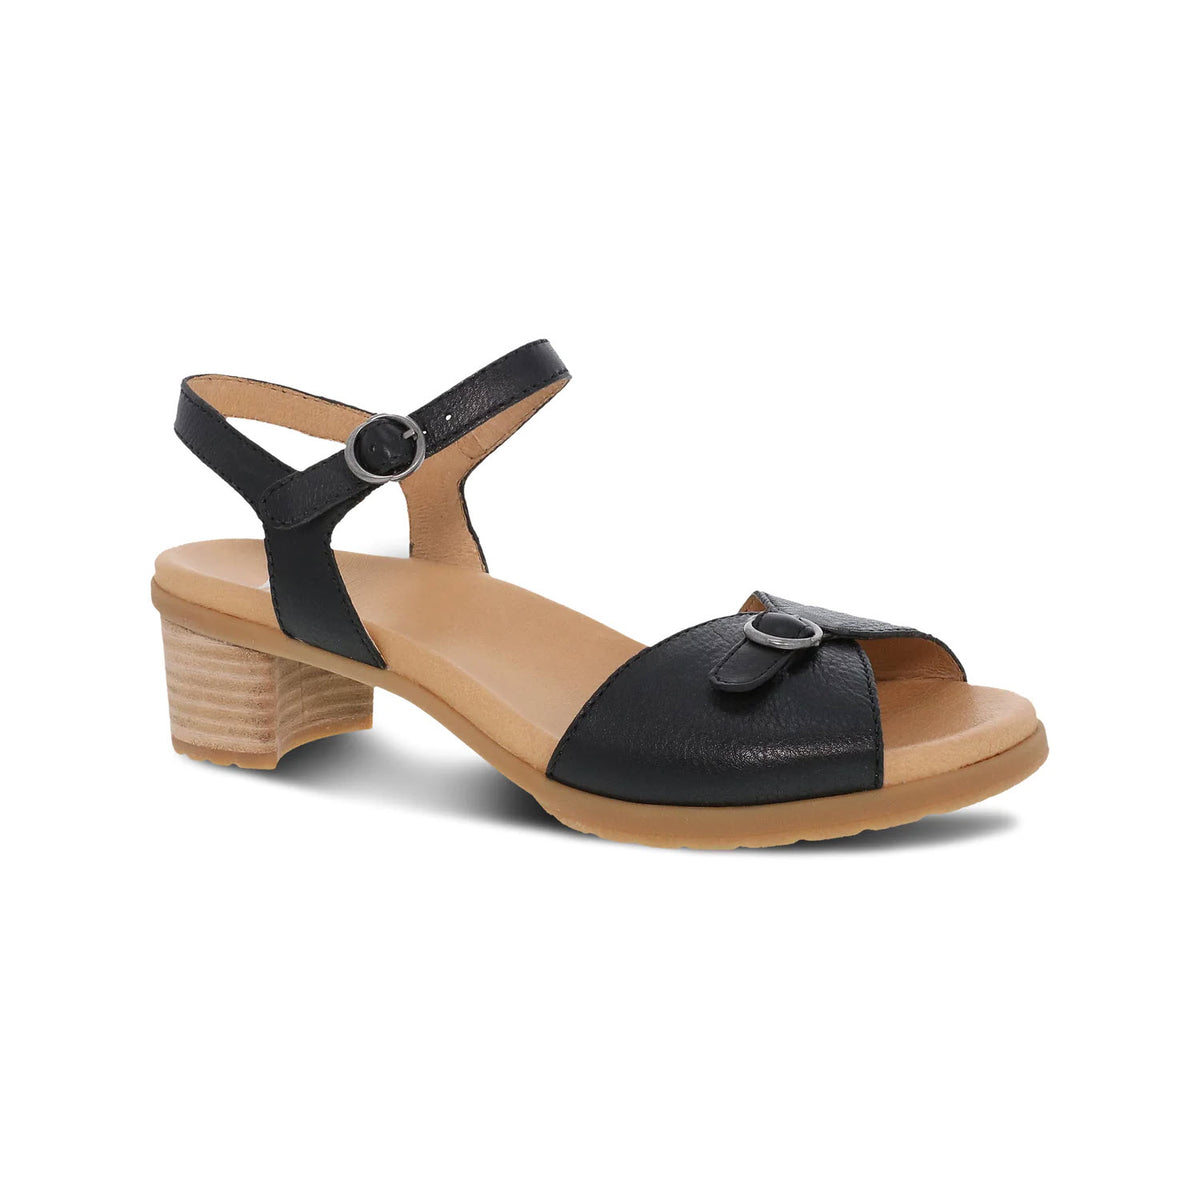 Dansko black leather heeled sandal with a single strap over the toes, an ankle strap with a buckle, and a short stacked wooden heel, displayed on a white background.